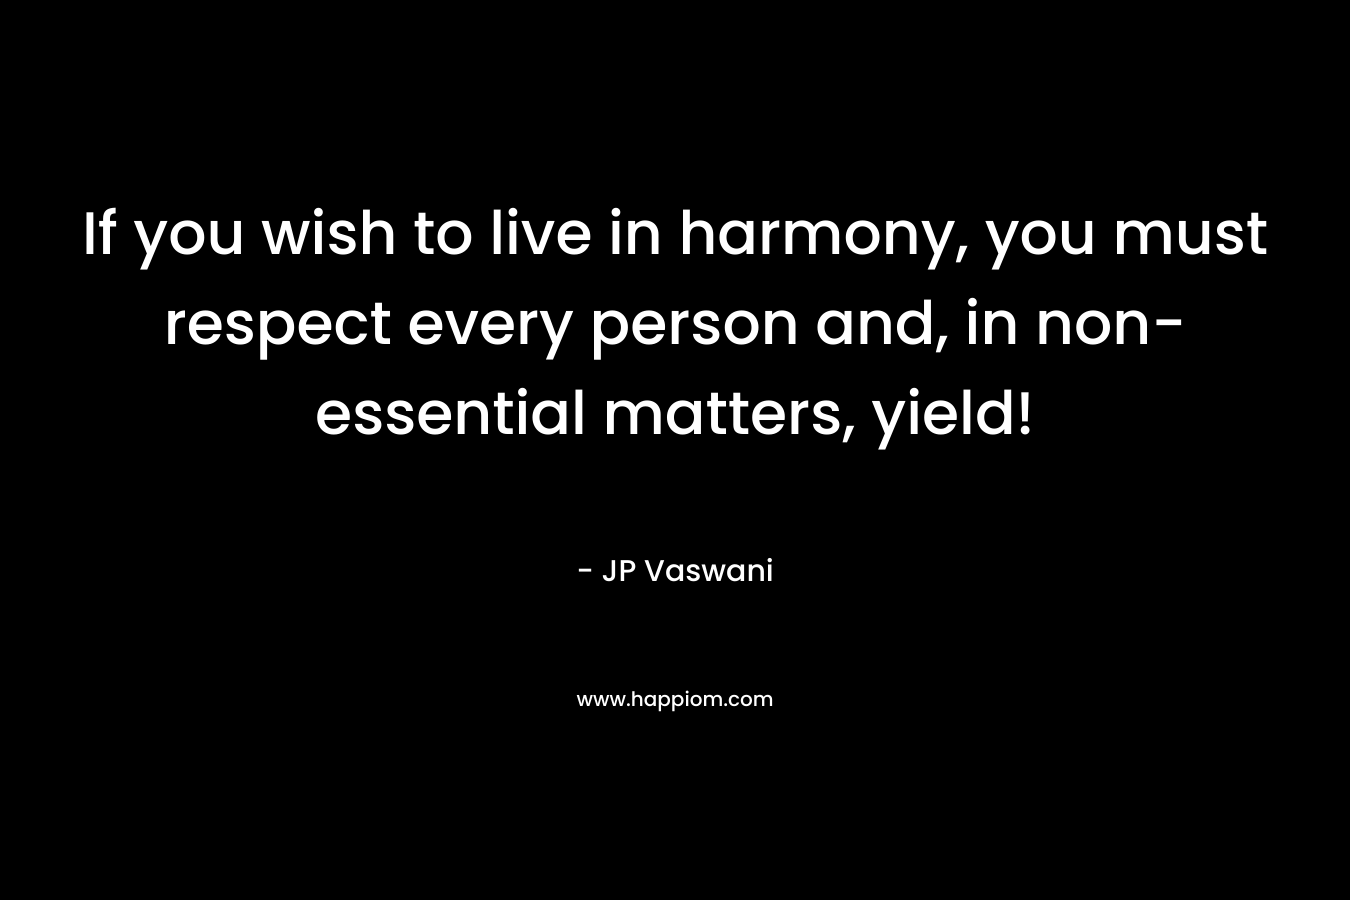 If you wish to live in harmony, you must respect every person and, in non-essential matters, yield! – JP Vaswani